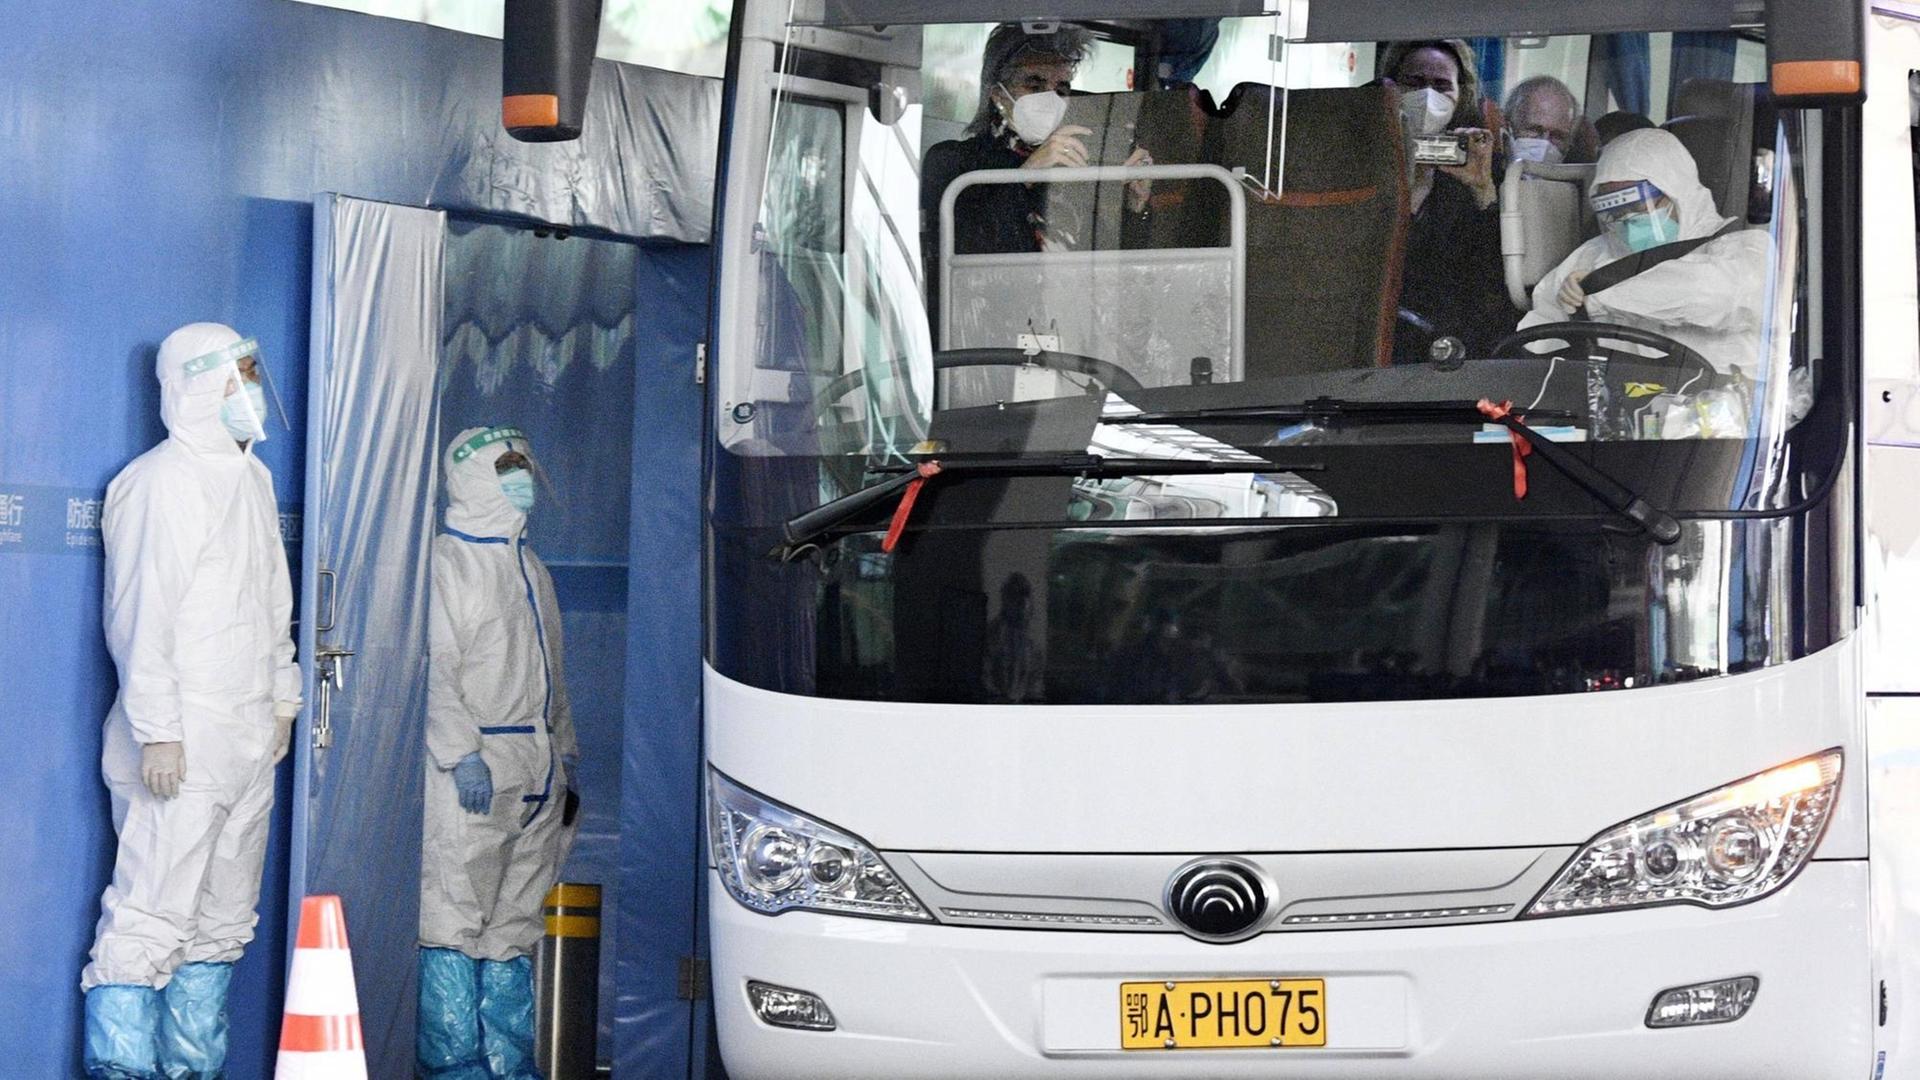 A bus carrying a team of experts from the World Health Organization departs an airport in Wuhan on Jan. 14, 2021, after arriving in the Chinese city to investigate the origins of the novel coronavirus. The 10-member team is expected to conduct the research in Wuhan, where Chinese authorities reported the first coronavirus case in December 2019, for about two weeks, after being quarantined at a local hotel for about two weeks.